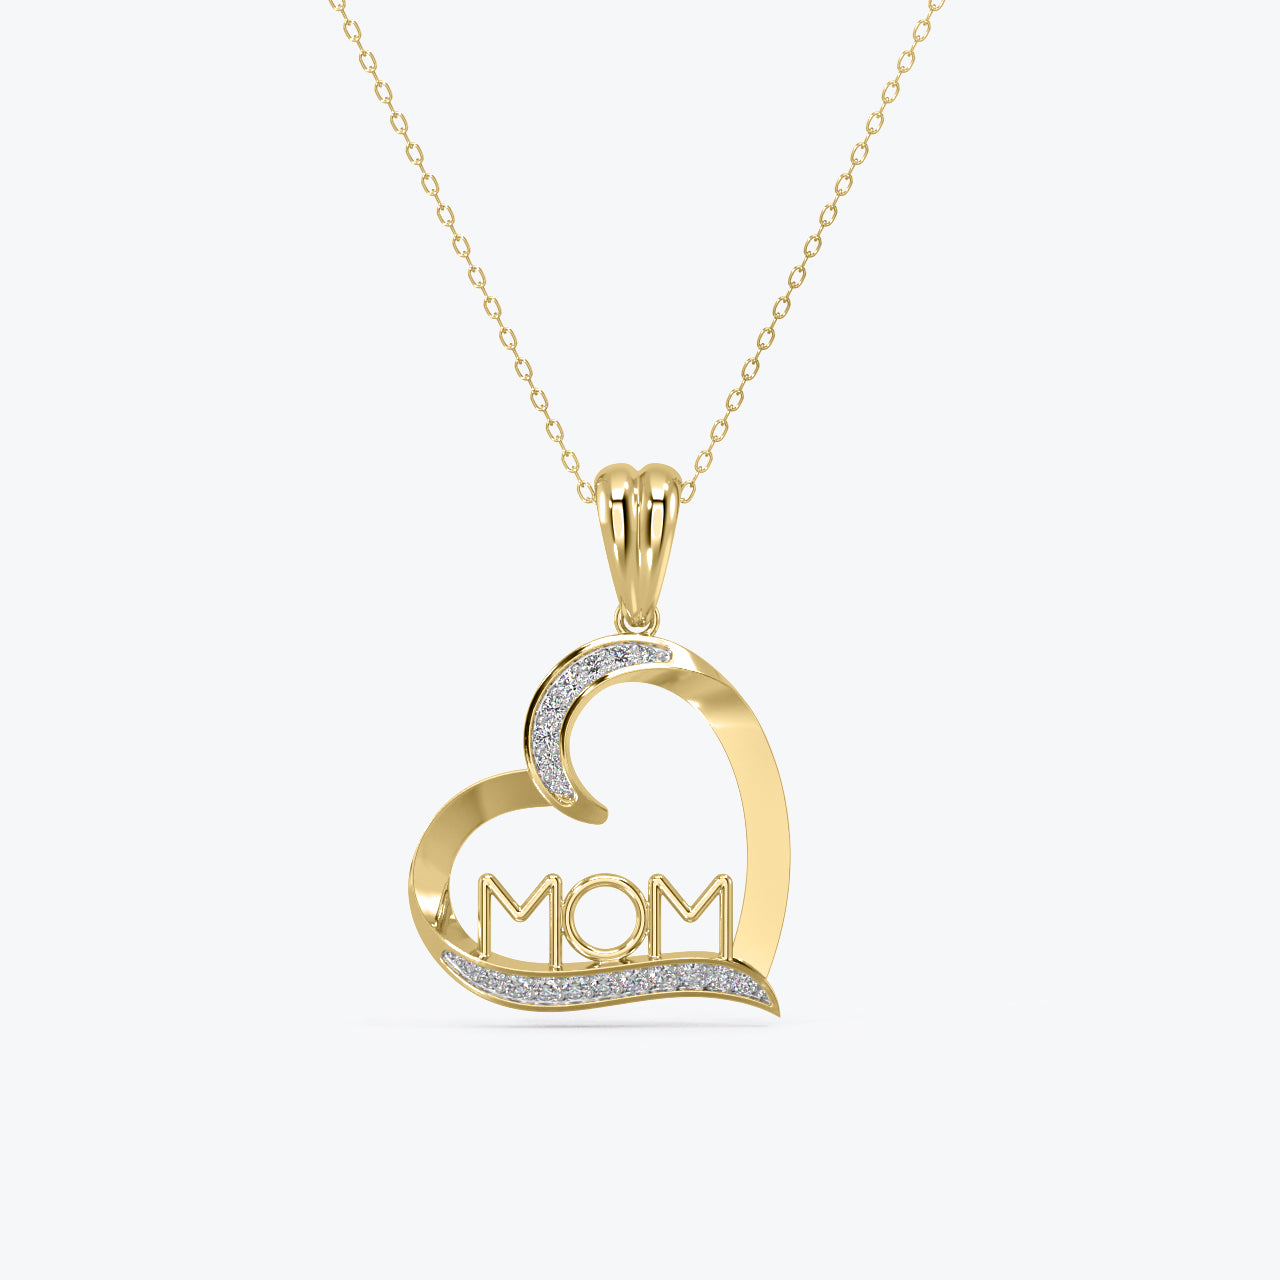 14k Gold and Diamond Mom Necklace